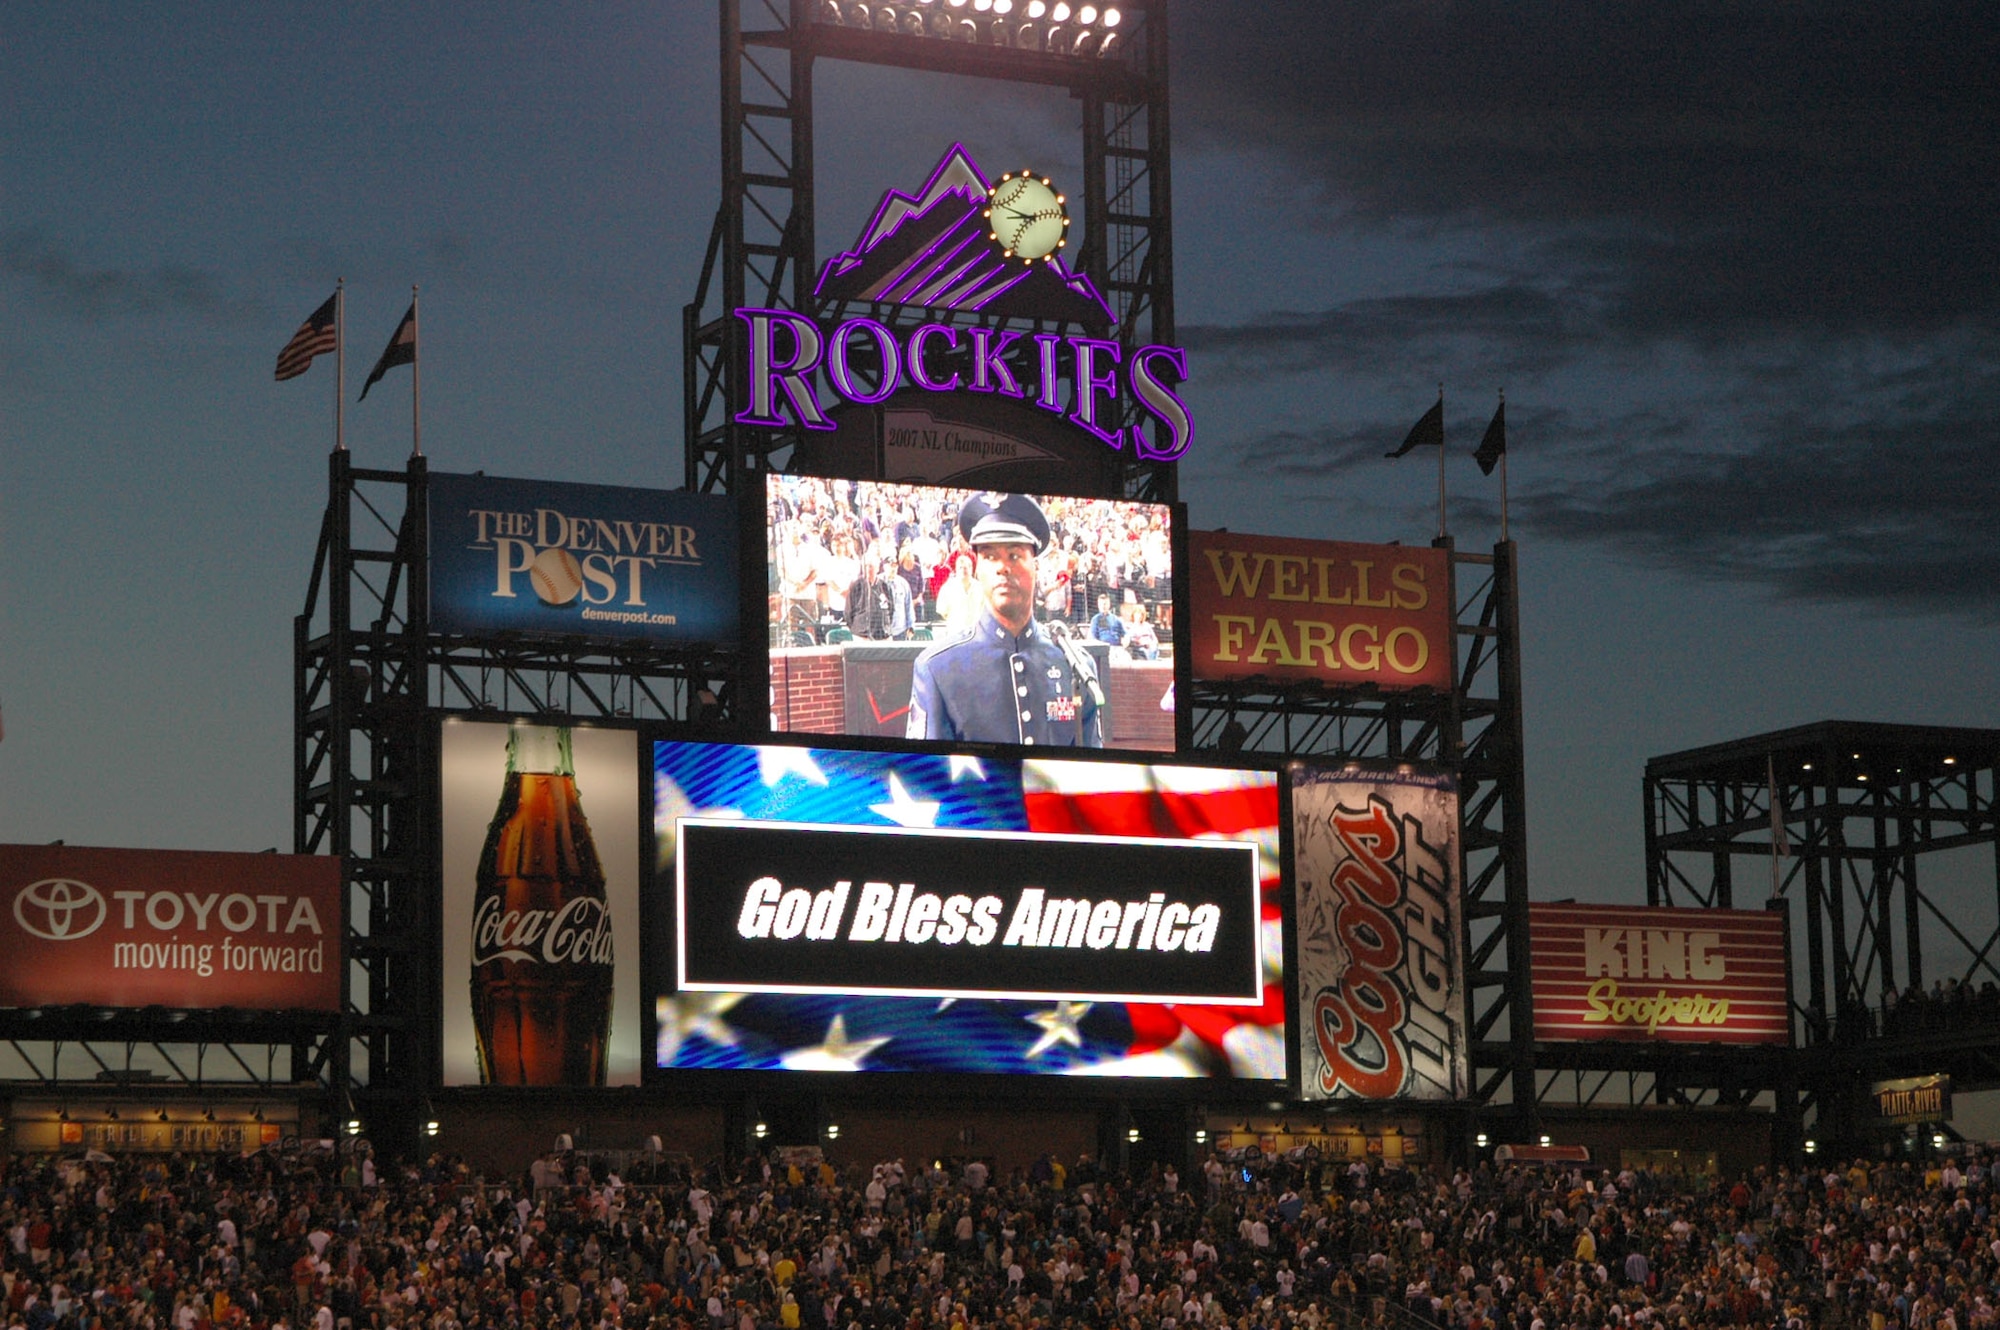 Master Sgt. Aaron Miles, a vocalist with the Air Force Reserve Command Band, is shown on the Coors Field 'jumbotron' before he sings the National Anthem July 4 at Coors Field in Denver. Sergeant Miles later presented a patriotic tone by singing the National Anthem in front of more than 51,000 fans, and during the game?s seventh-inning stretch, he also sang God Bless America to the roaring crowd in celebration of Independence Day. Coors Field is home to the Major League Baseball's Colorado Rockies. (U.S. Air Force photo/Ann Skarban)